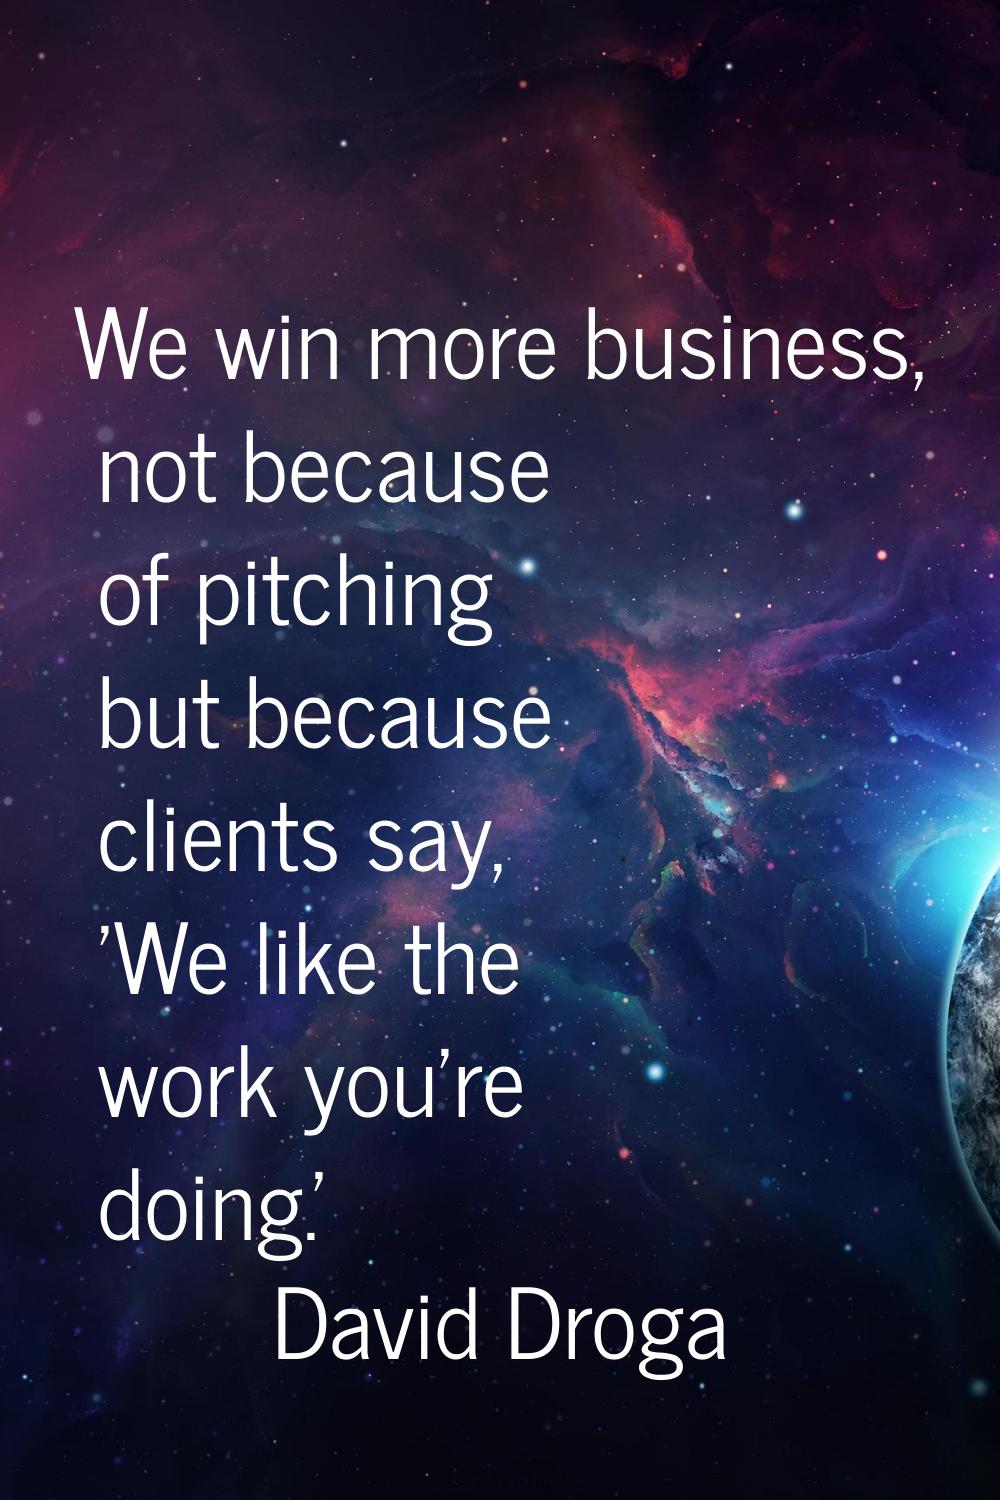 We win more business, not because of pitching but because clients say, 'We like the work you're doi